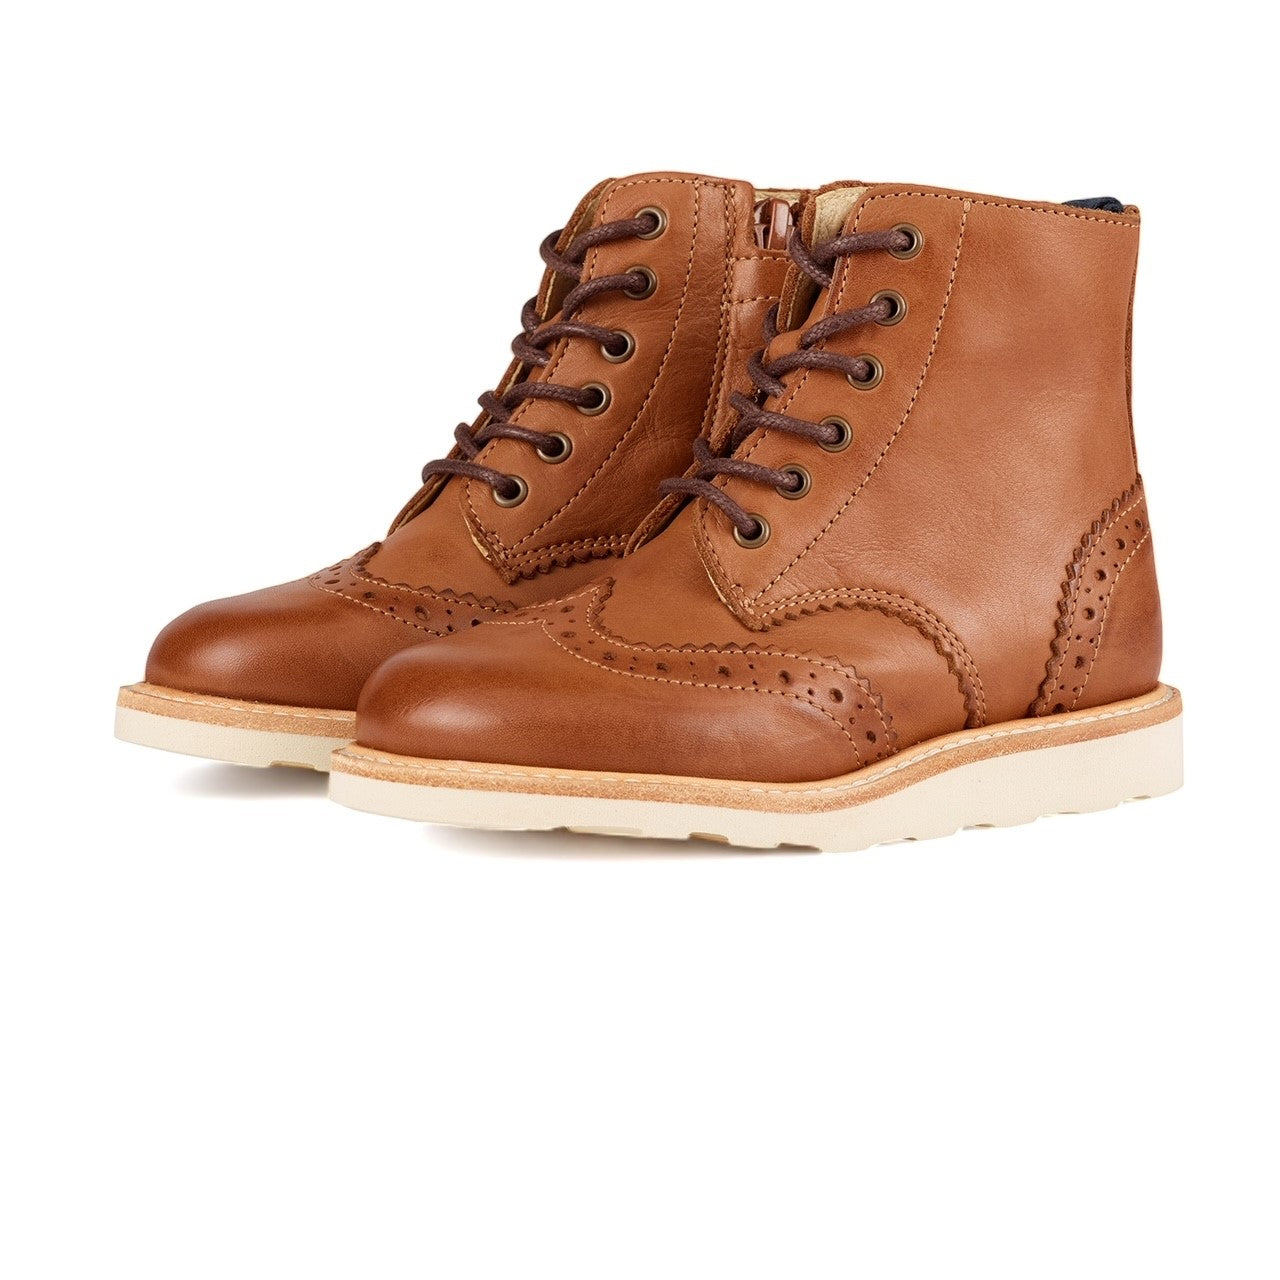 Young Soles Sidney Brogue Tan Leather Boots